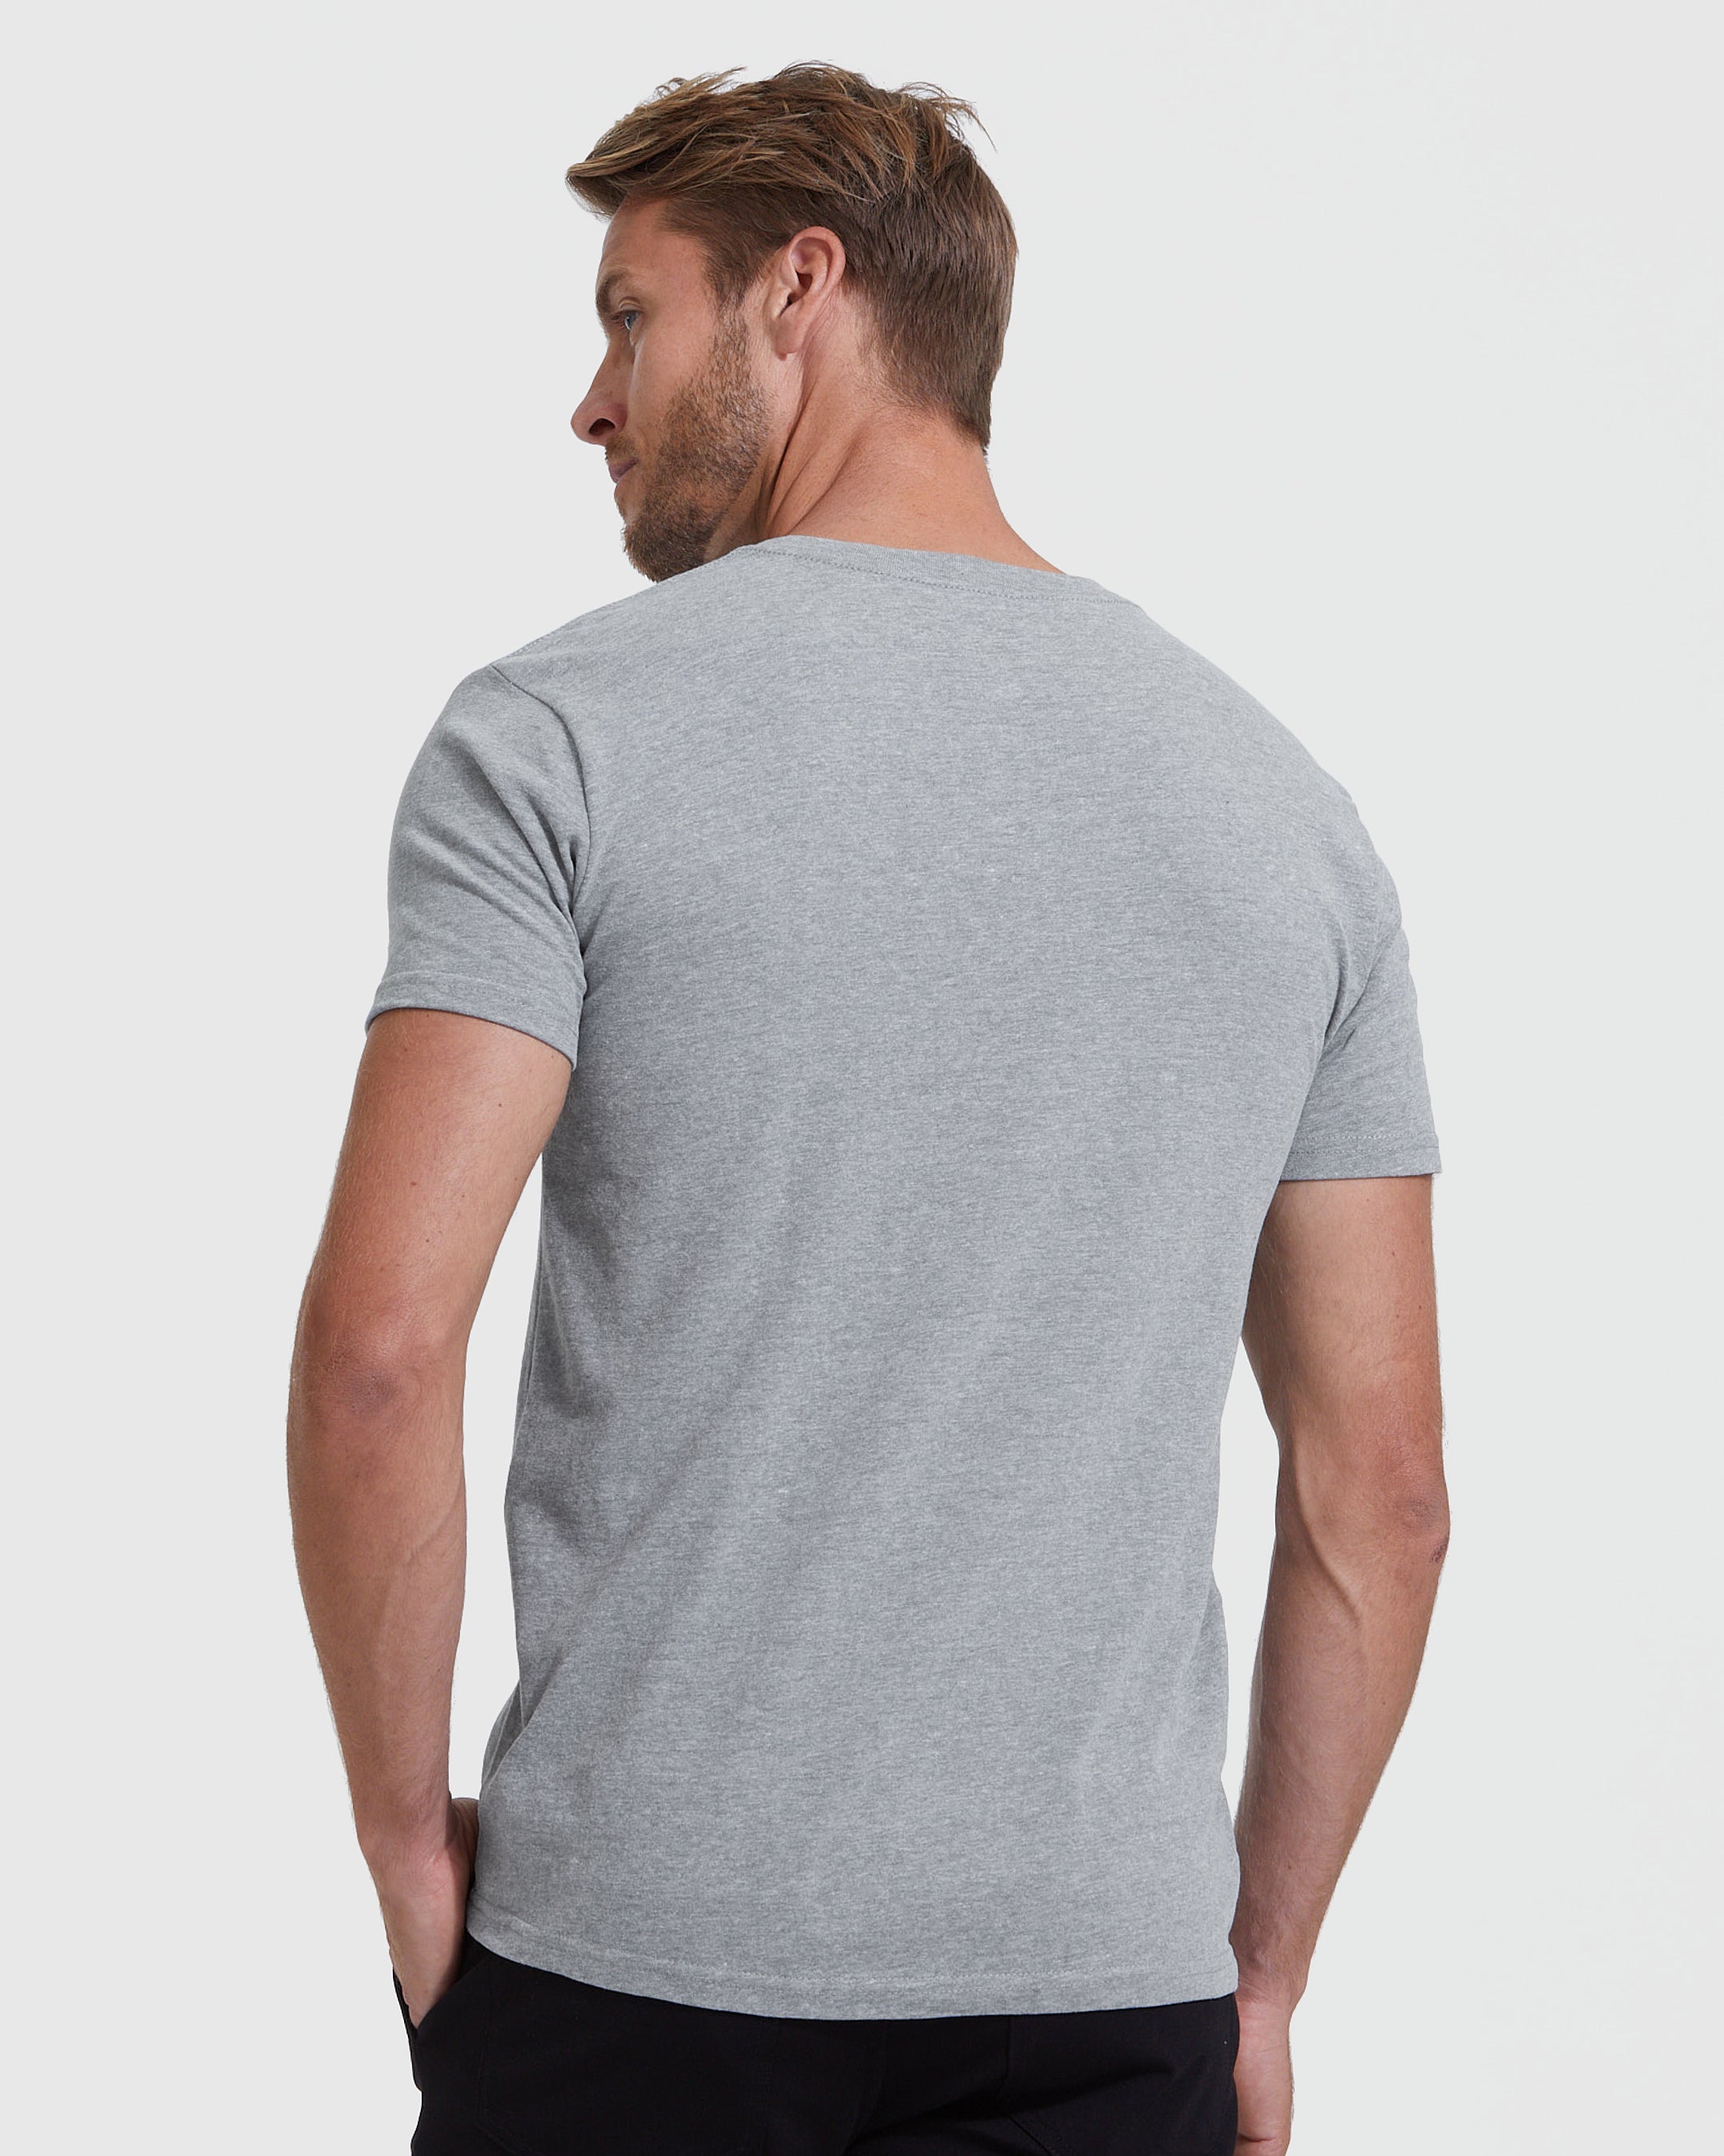 All Heather Gray 3-Pack